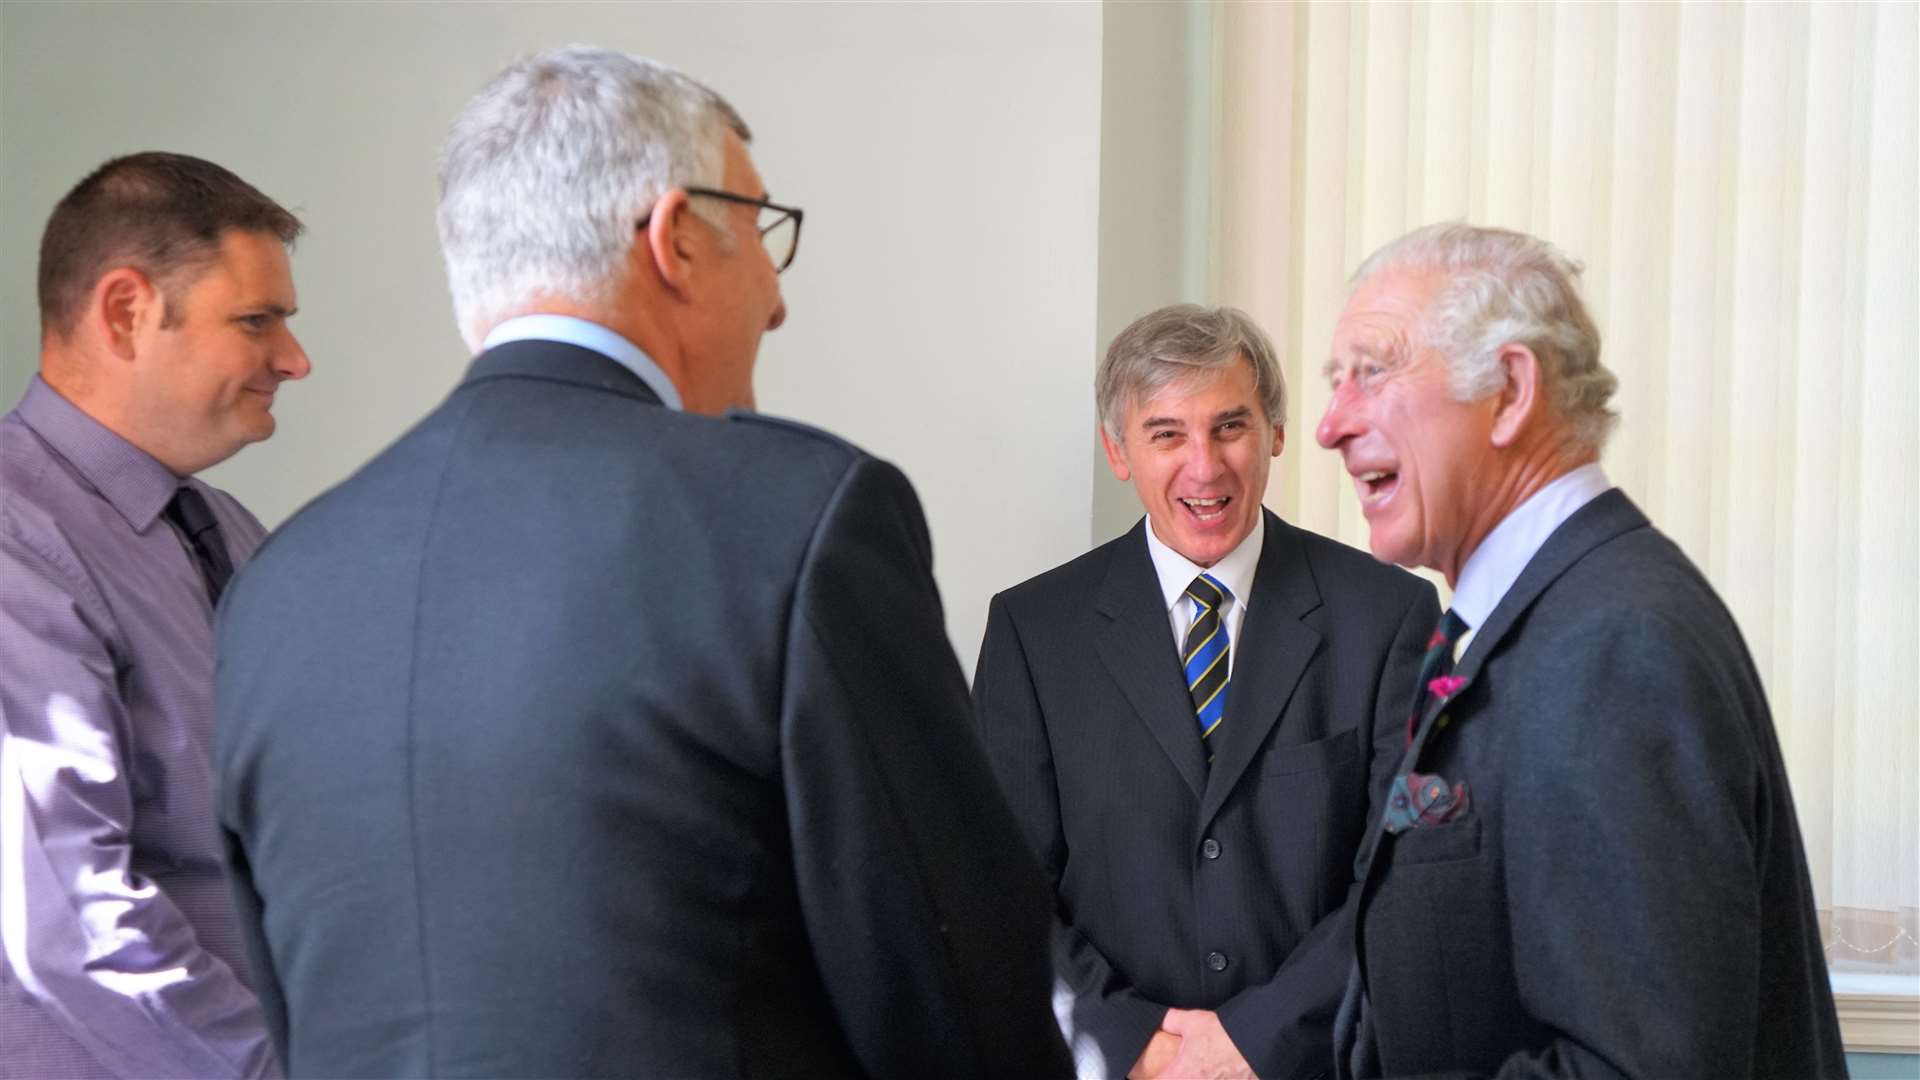 HRH meets members of the Royal Burgh of Wick Community Council and shares a laugh. Picture: DGS